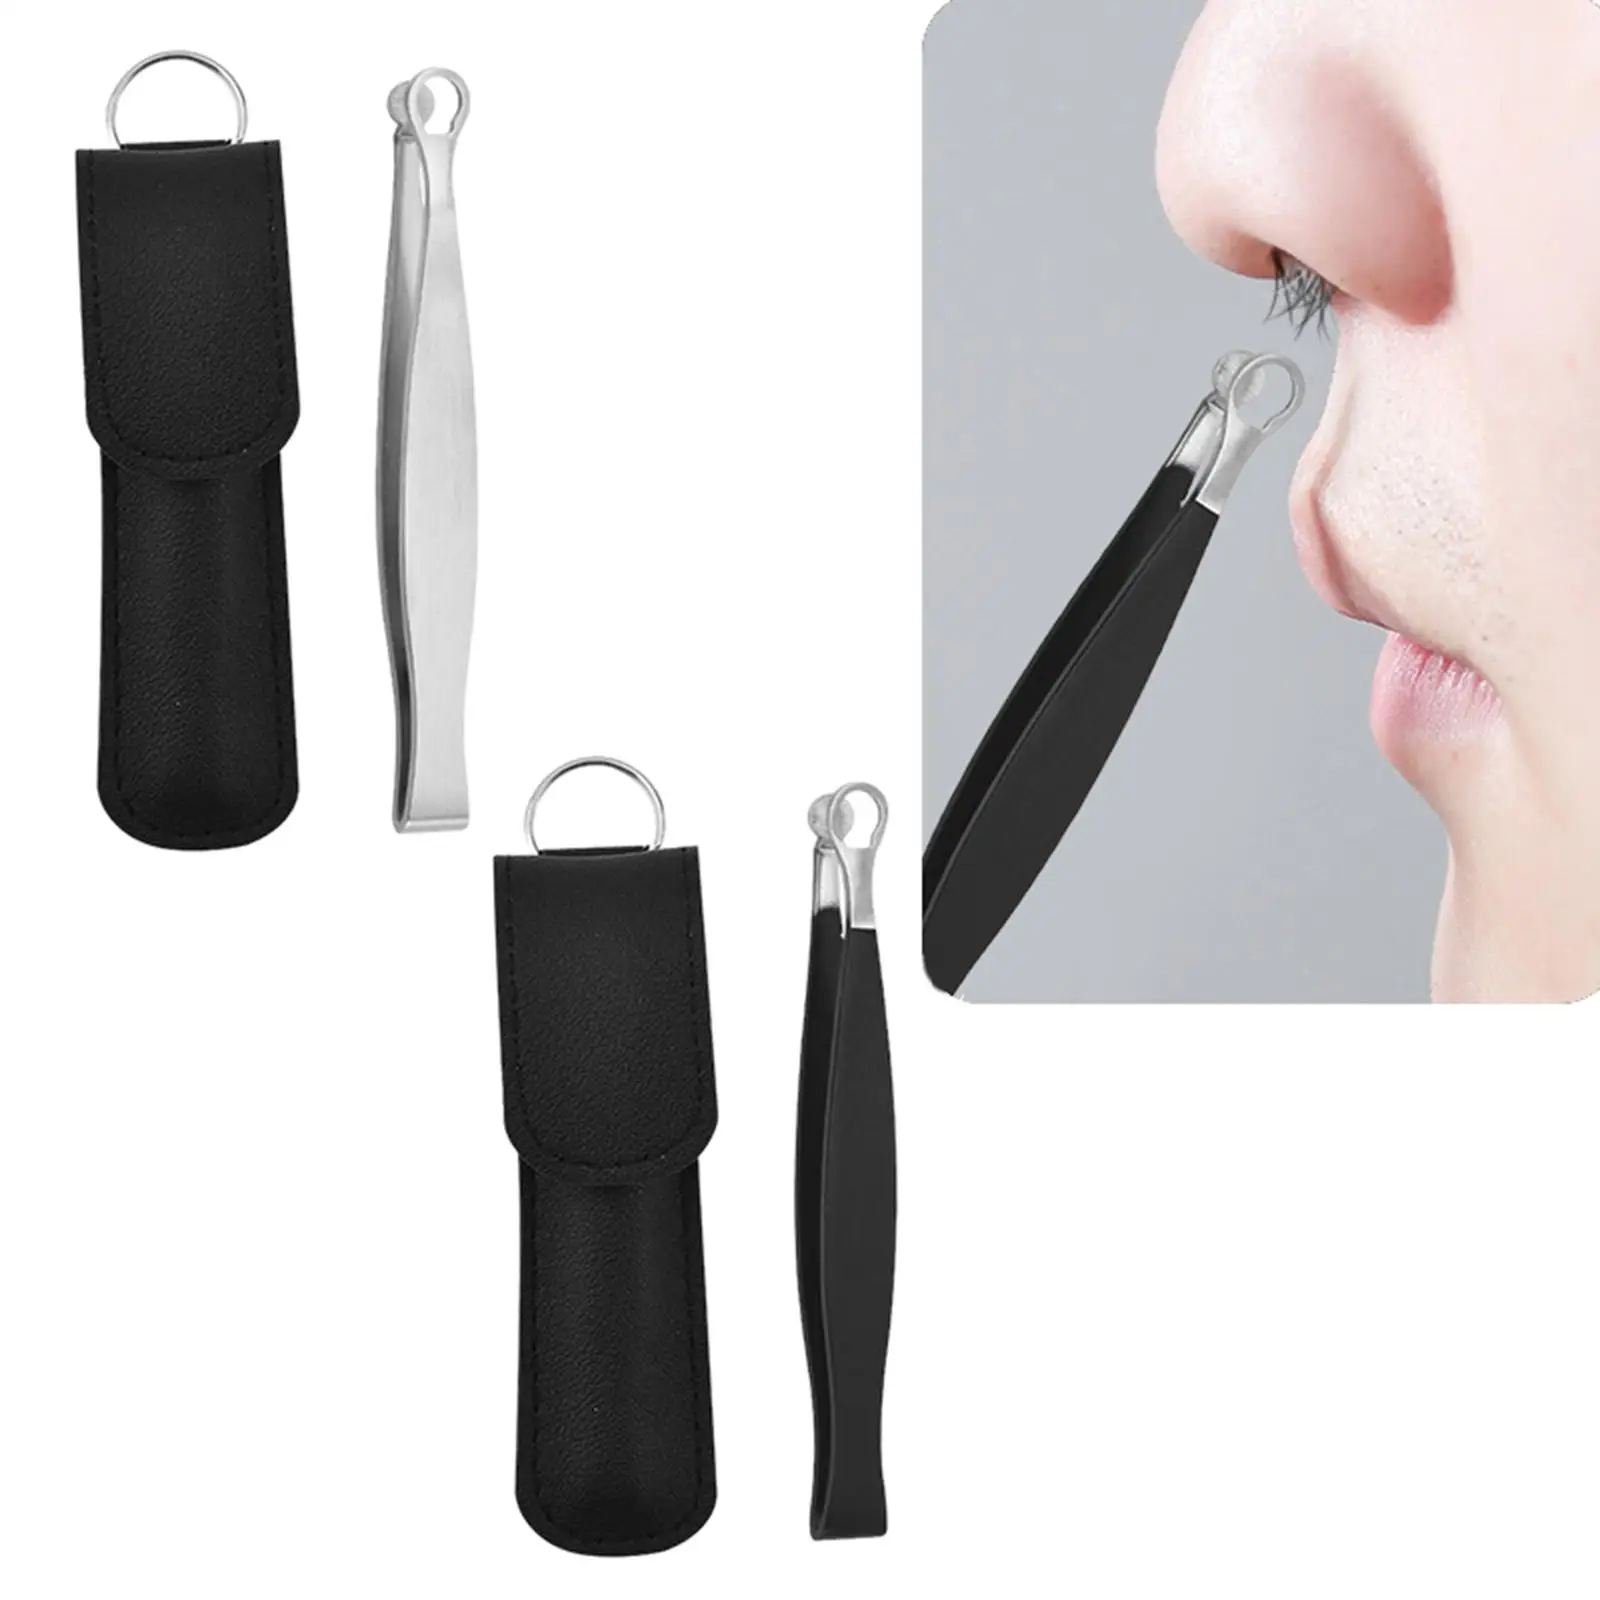 Universal Nose Hair Trimming Tweezers Round Head Personal Care Nose Trimmer for Nose Cleaning Makeup Body Women Men Sideburns